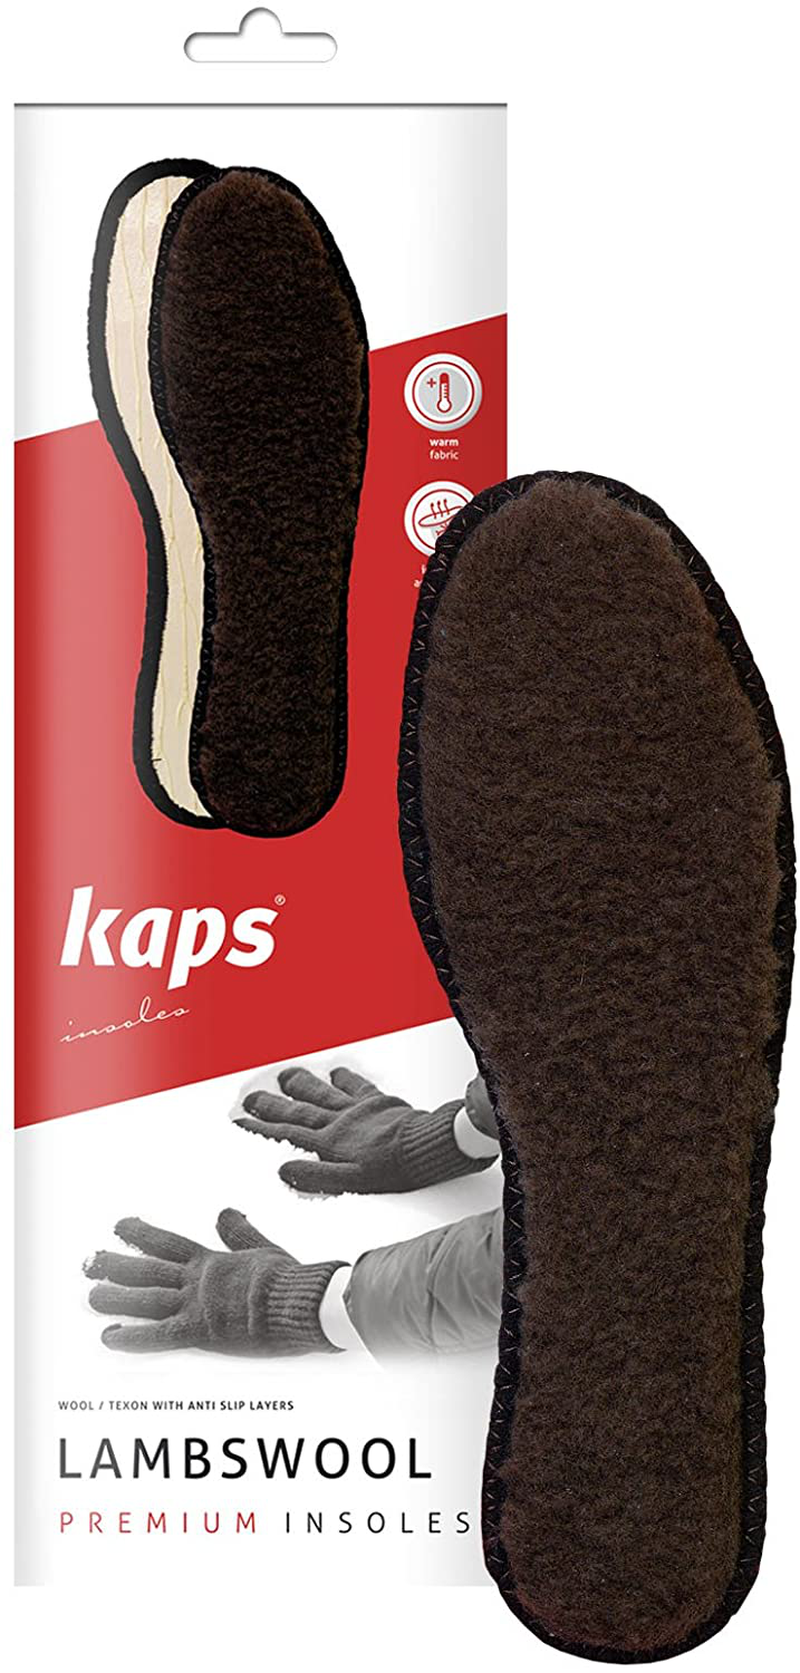 Lambswool Winter Insoles for Boots or Shoes, Insole Replacement for Man and Woman, Lambskin Inner Soles, Shoe Inserts Accessories, by Kaps (Men/Us 10/43 EUR)